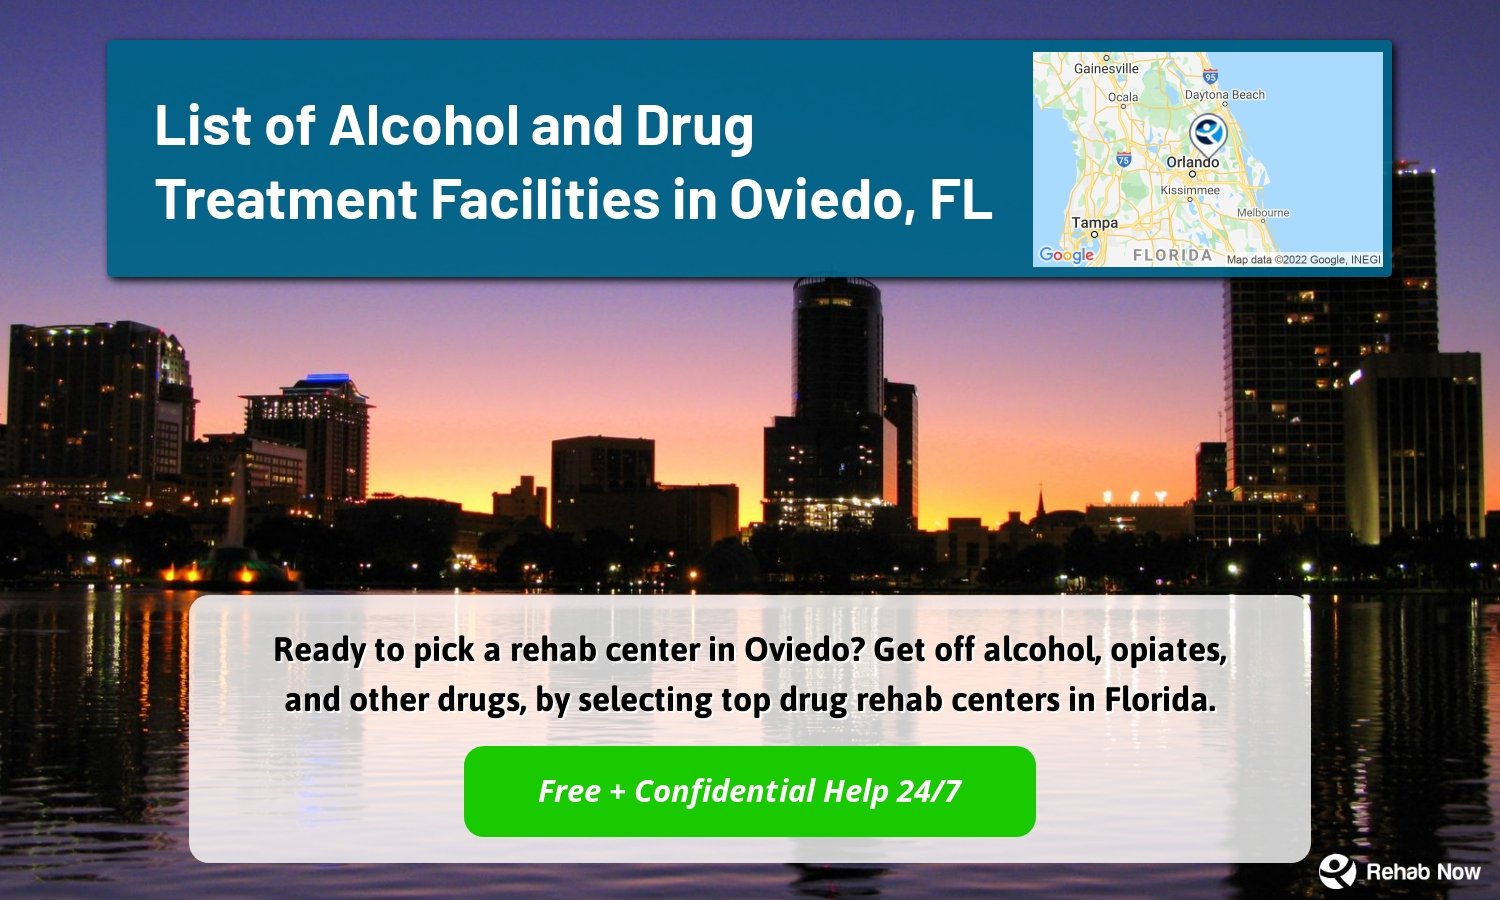 Ready to pick a rehab center in Oviedo? Get off alcohol, opiates, and other drugs, by selecting top drug rehab centers in Florida.